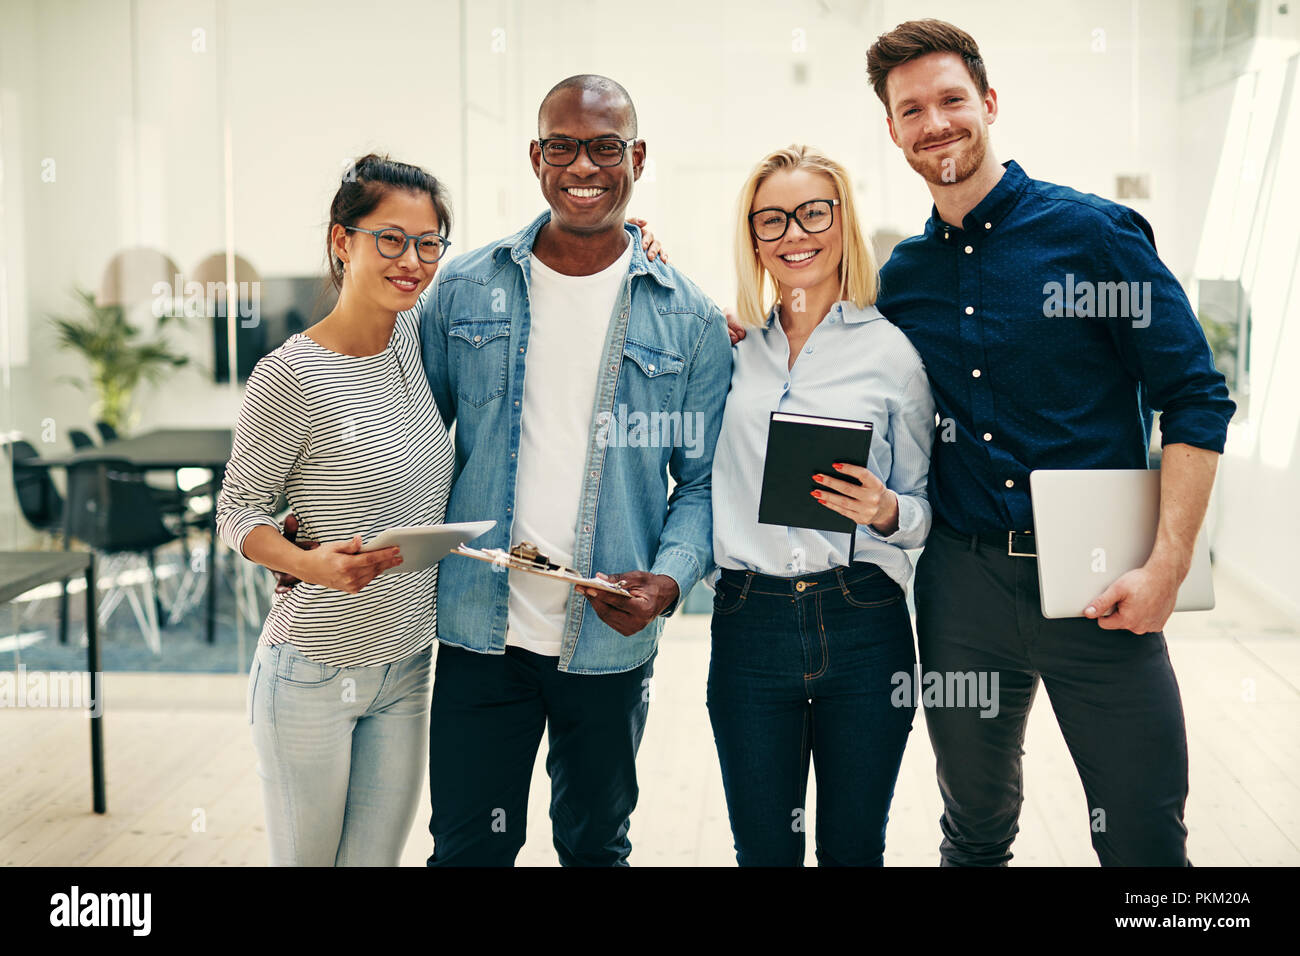 Diverse group of smiling young businesspeople standing together in a bright modern office ready for the business day Stock Photo